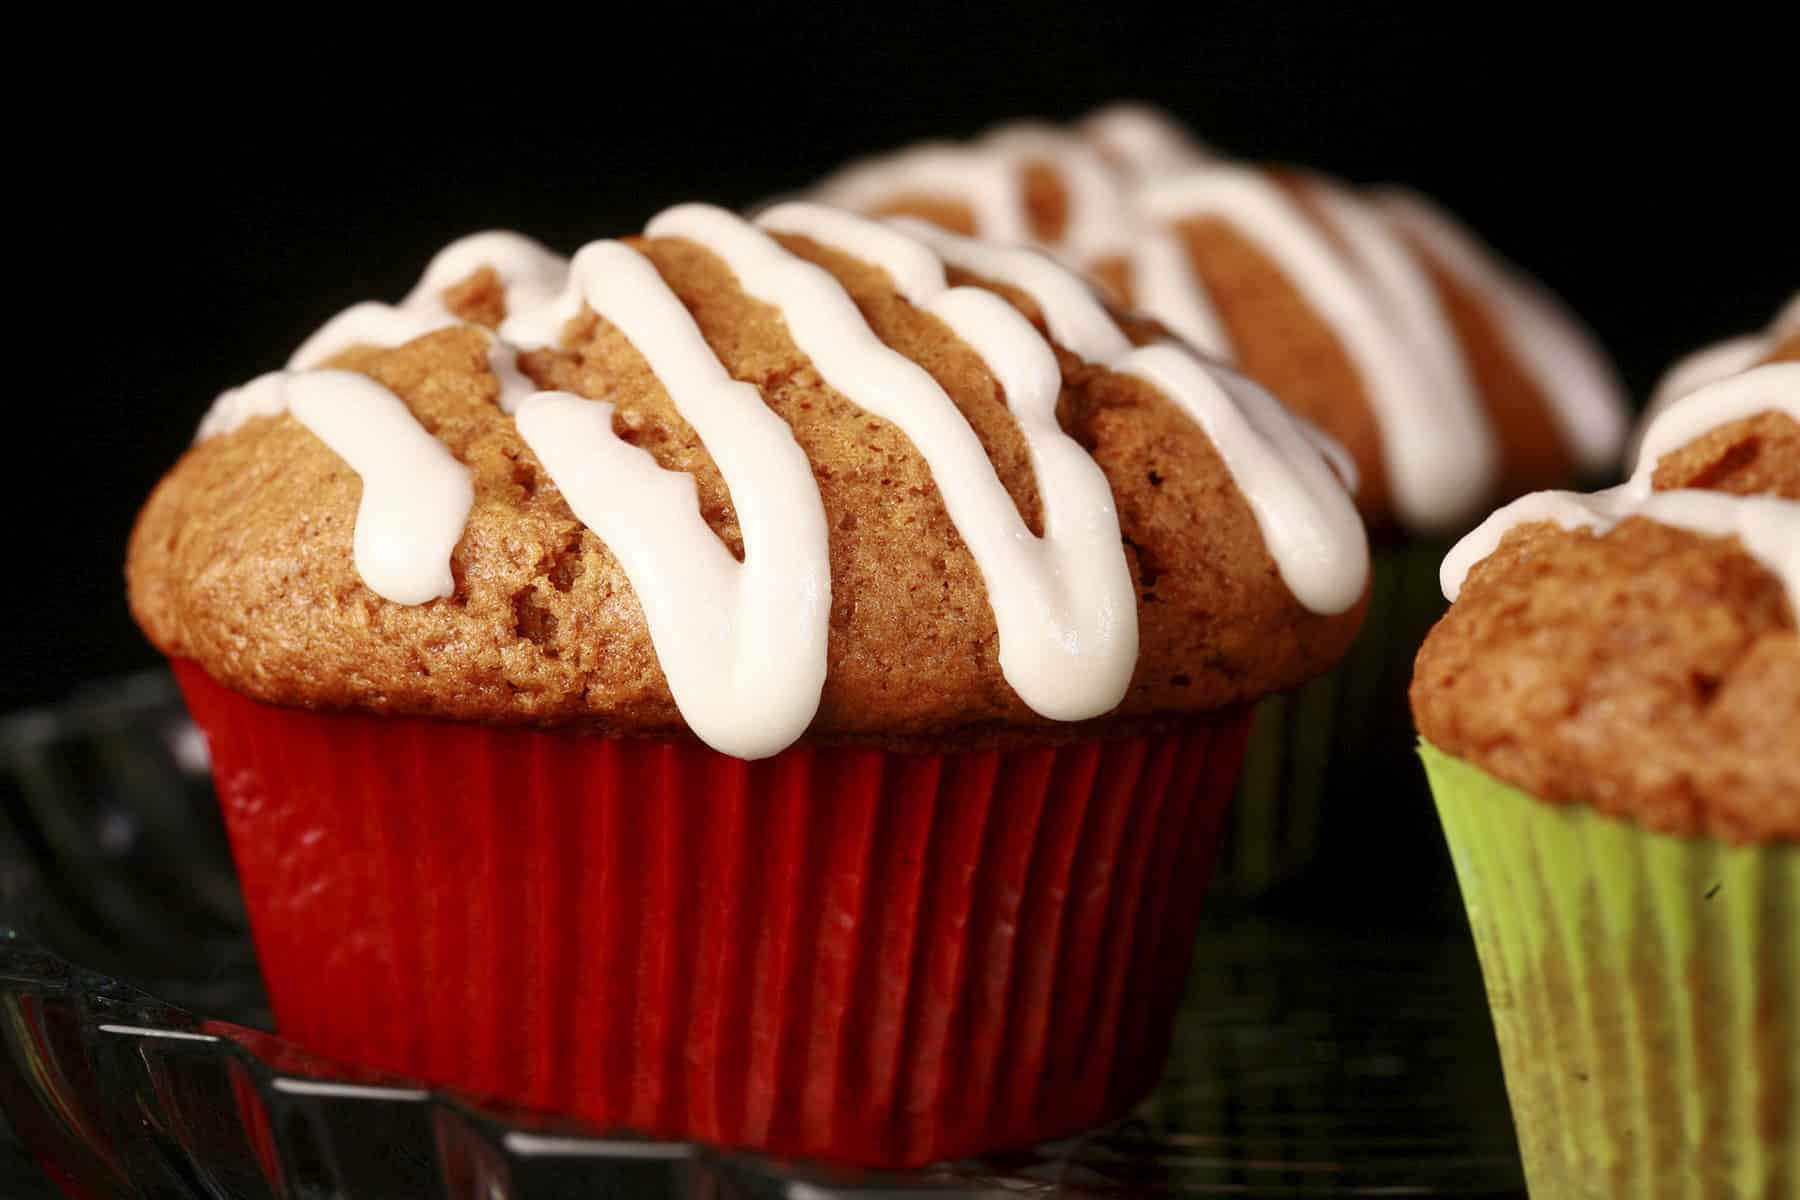 A plate of homemade gingerbread muffins, each drizzled with a white frosting.